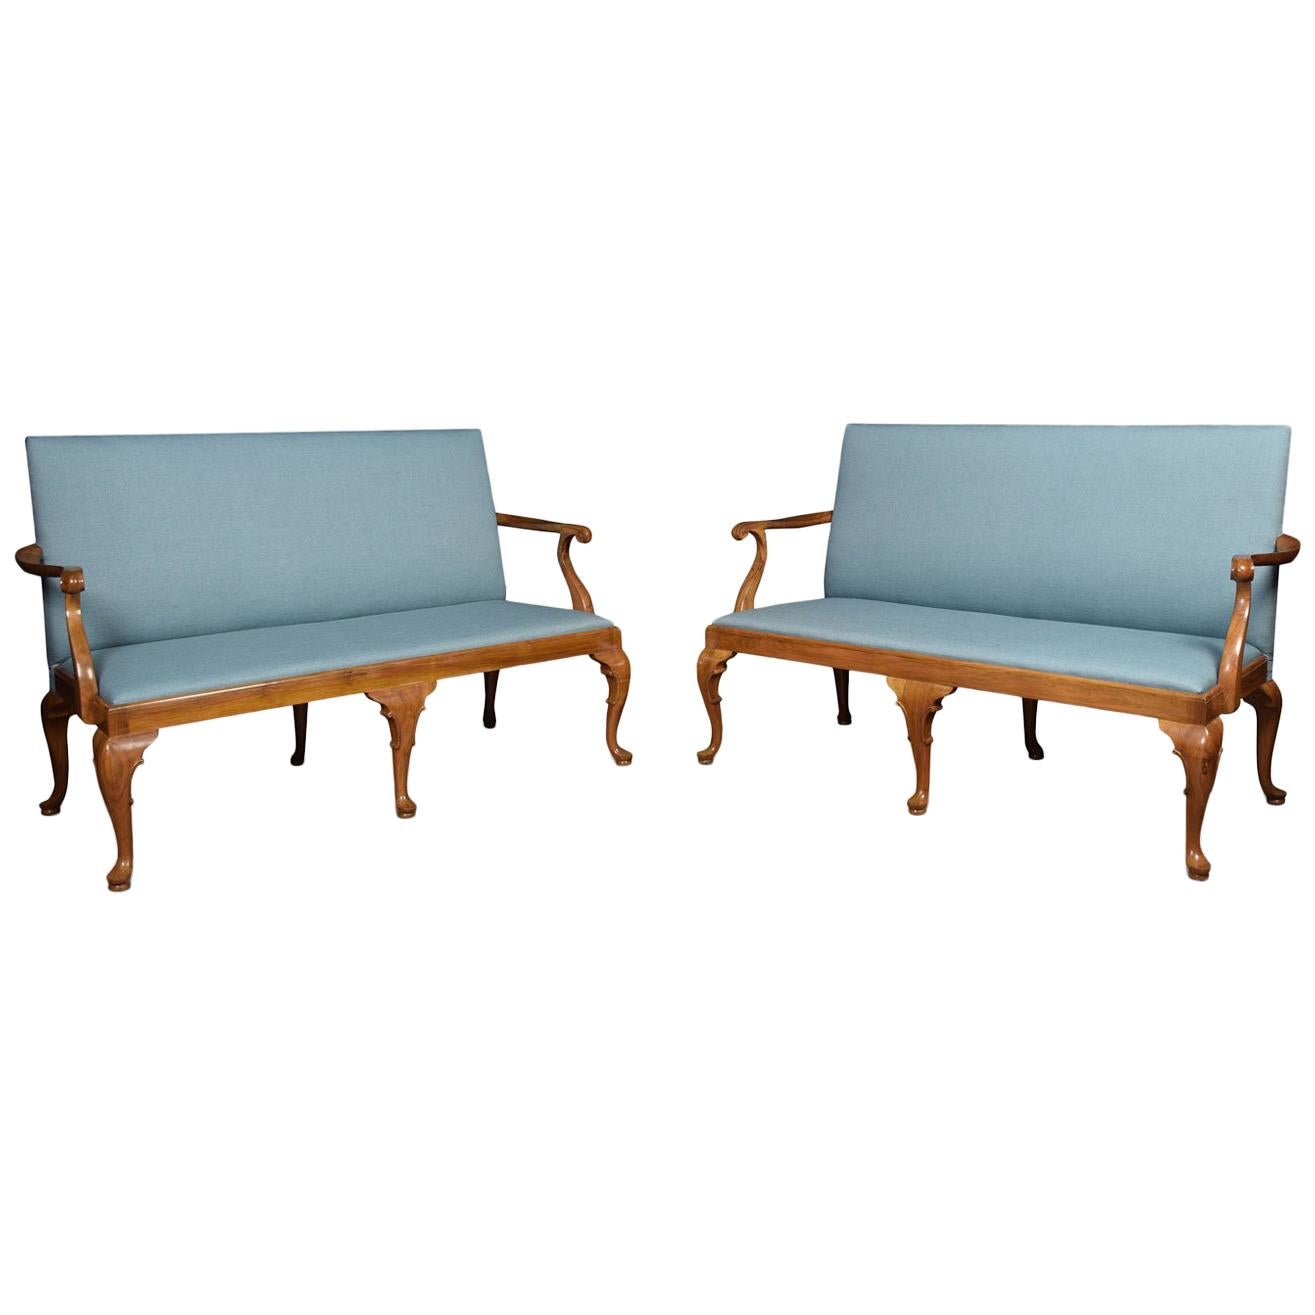 Pair of Walnut Framed Queen Anne Style Settees